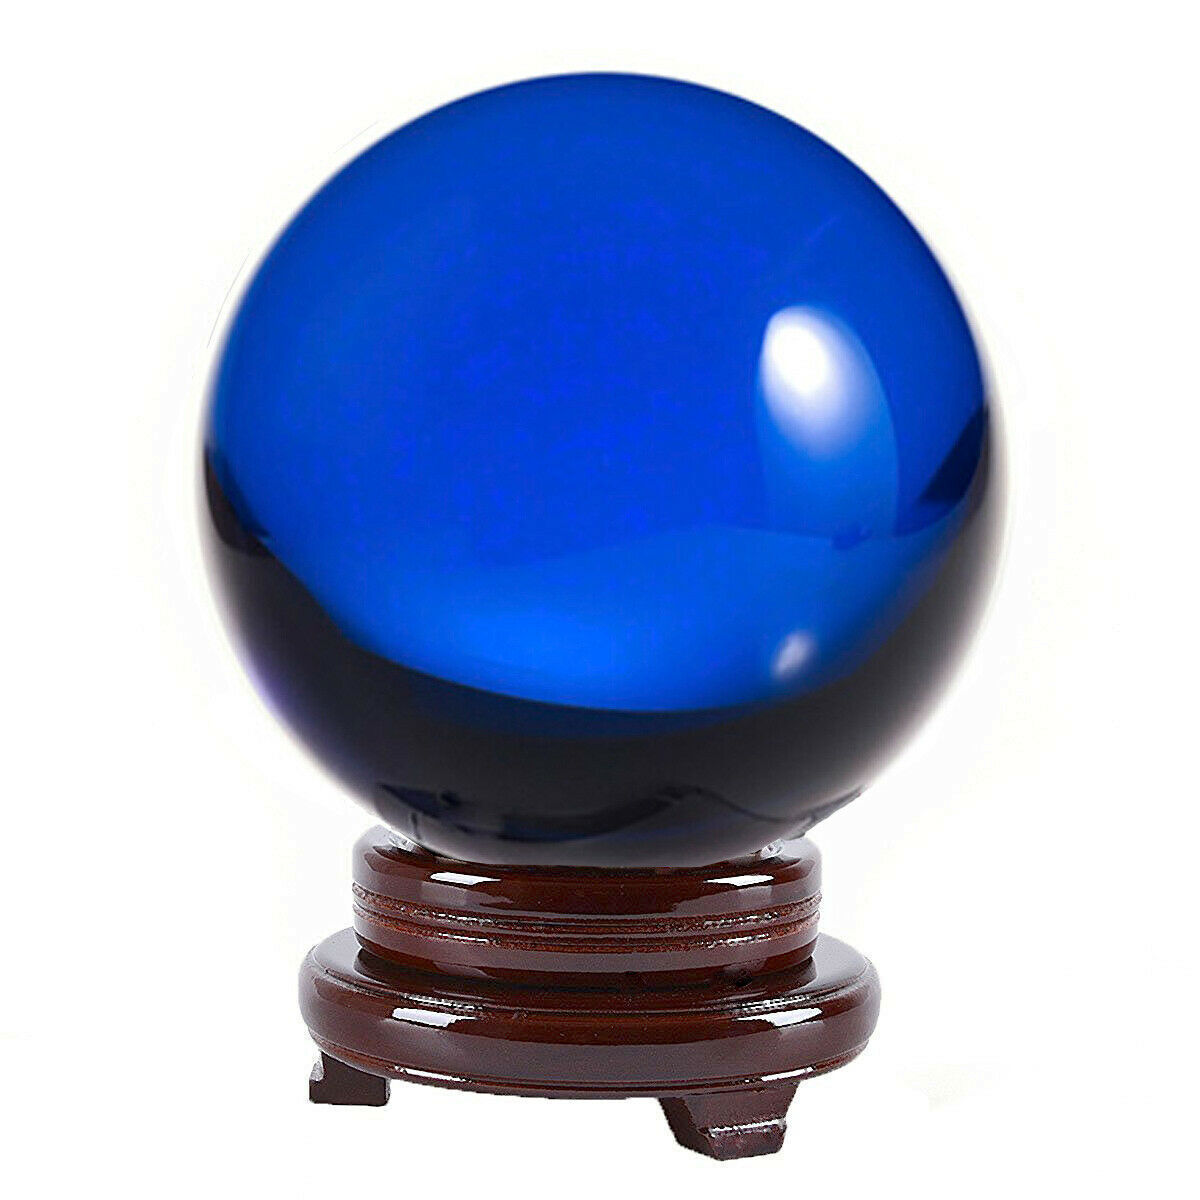 200mm Amlong Crystal Meditation Divination Sphere Crystal Ball with Wood Stand